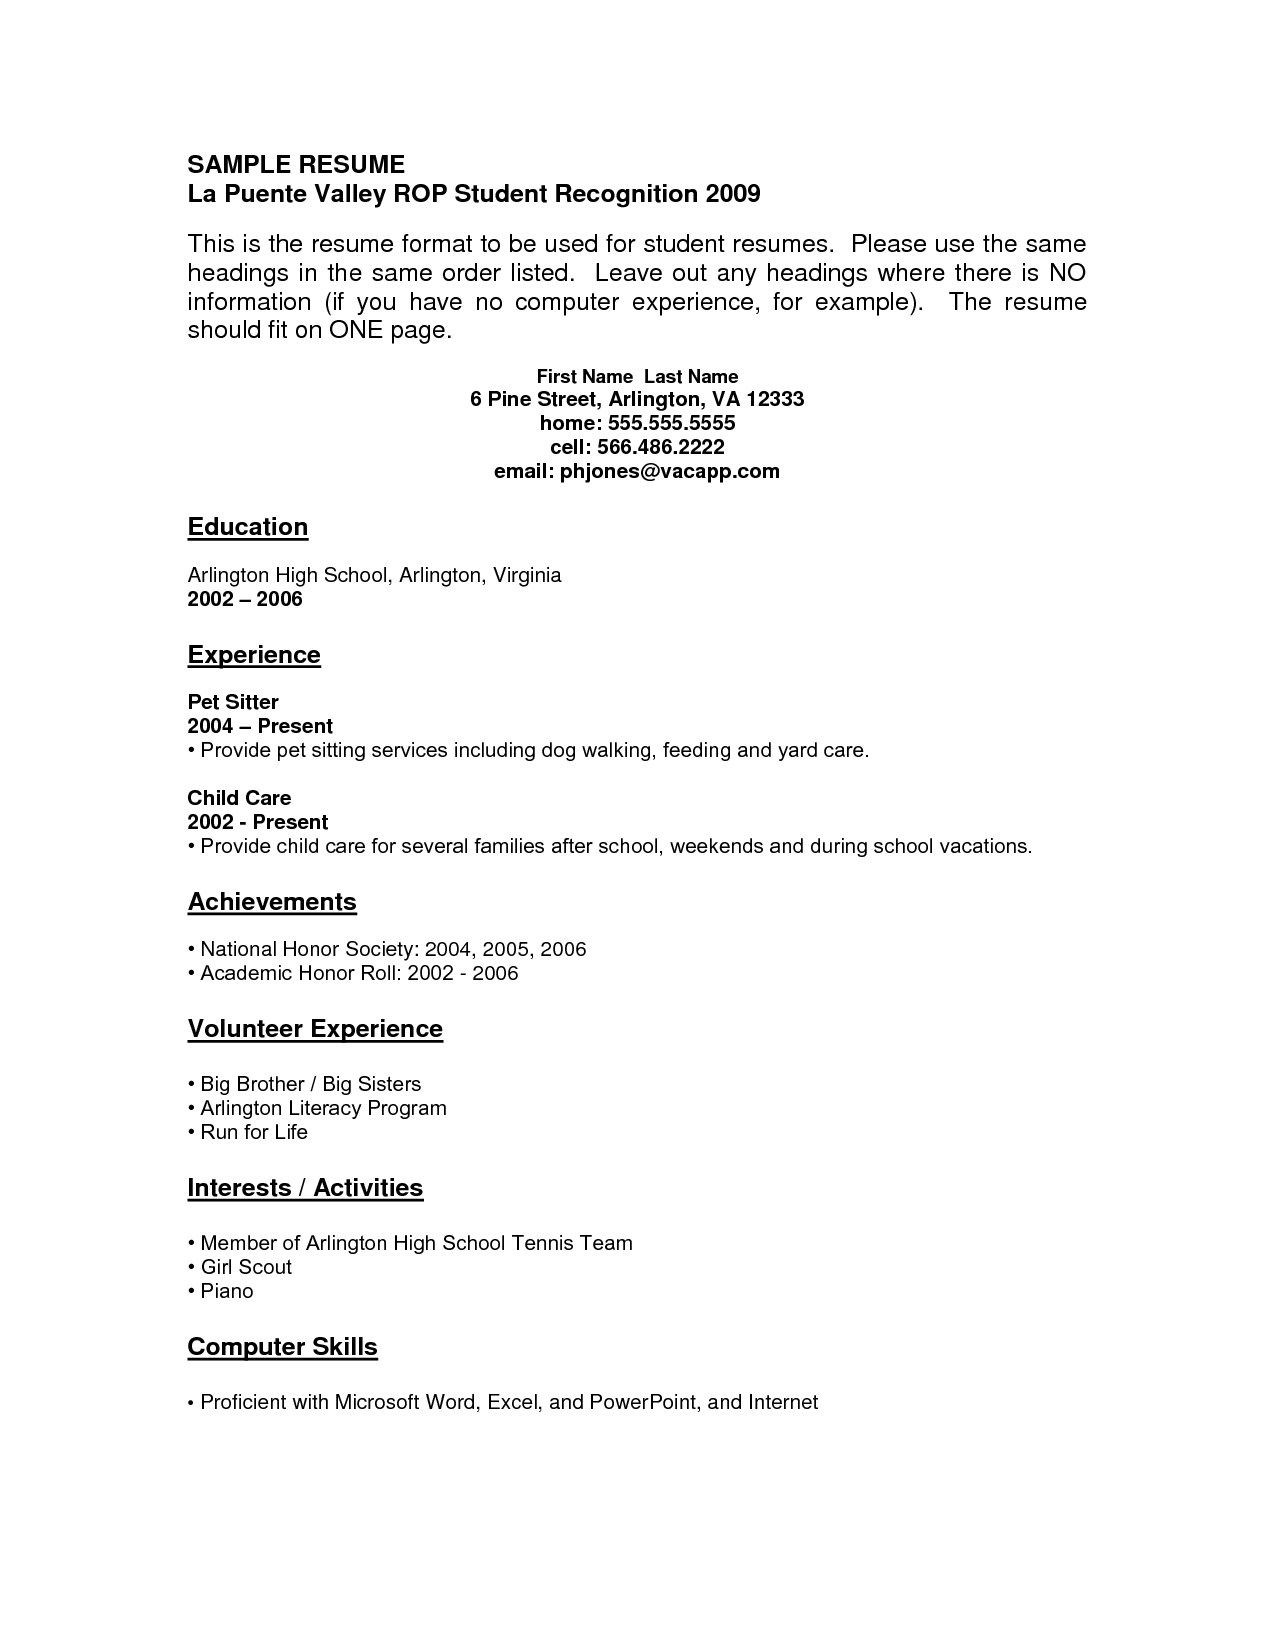 Sample Of Resume for College Students with No Experience Resume Examples with No Job Experience – Resume Templates Job …